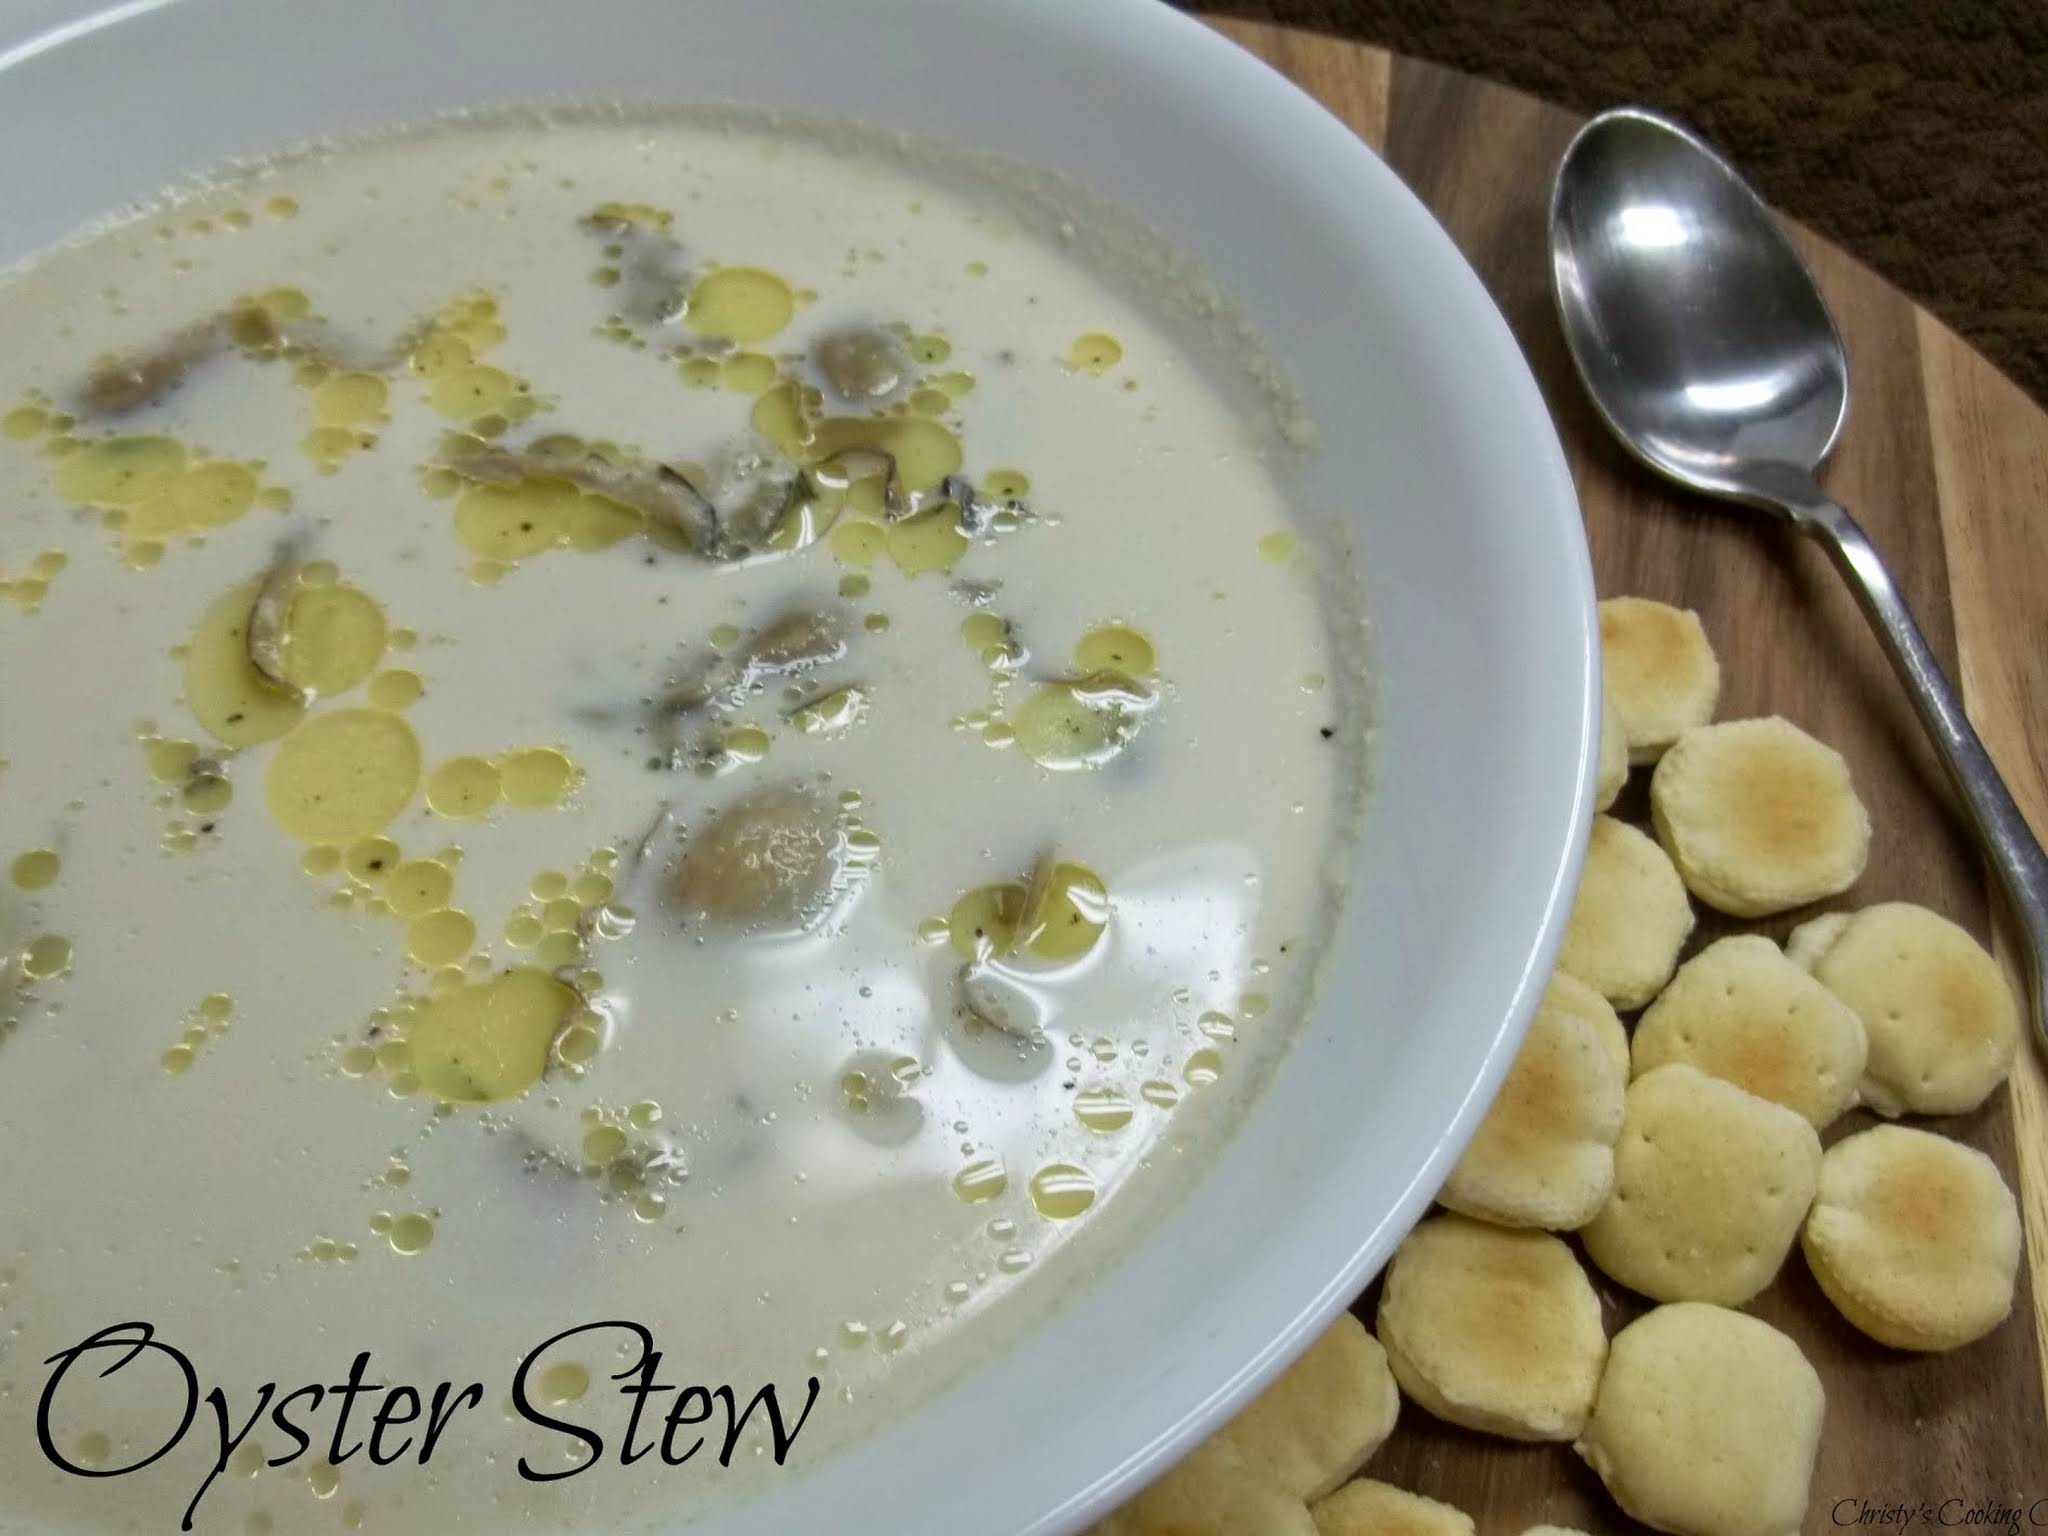 Easy Homemade Oyster Chowder - Fearless Dining